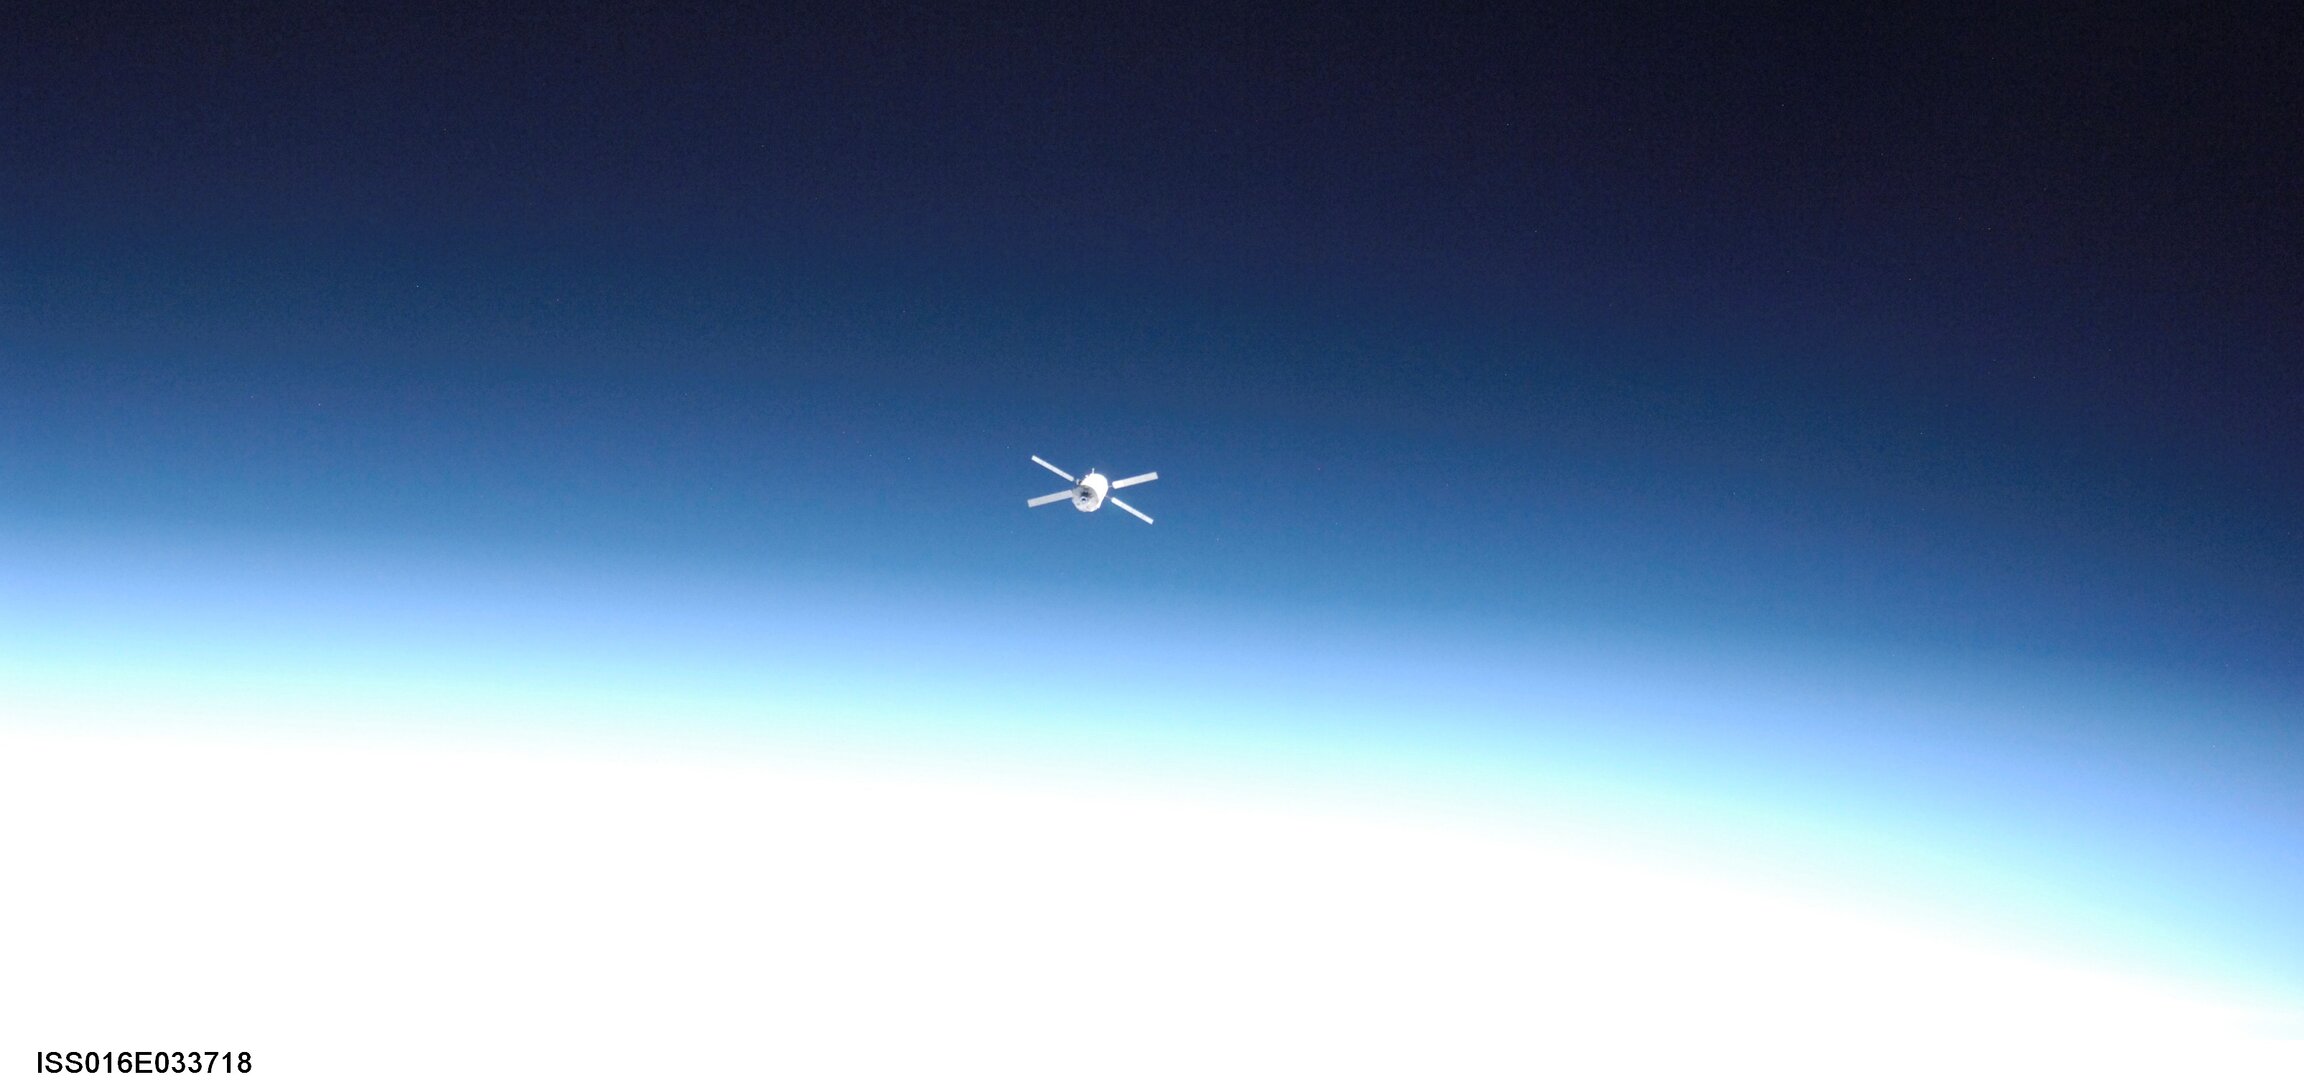 Jules Verne ATV as seen from the ISS during a rendezvous test on 29 March 2008